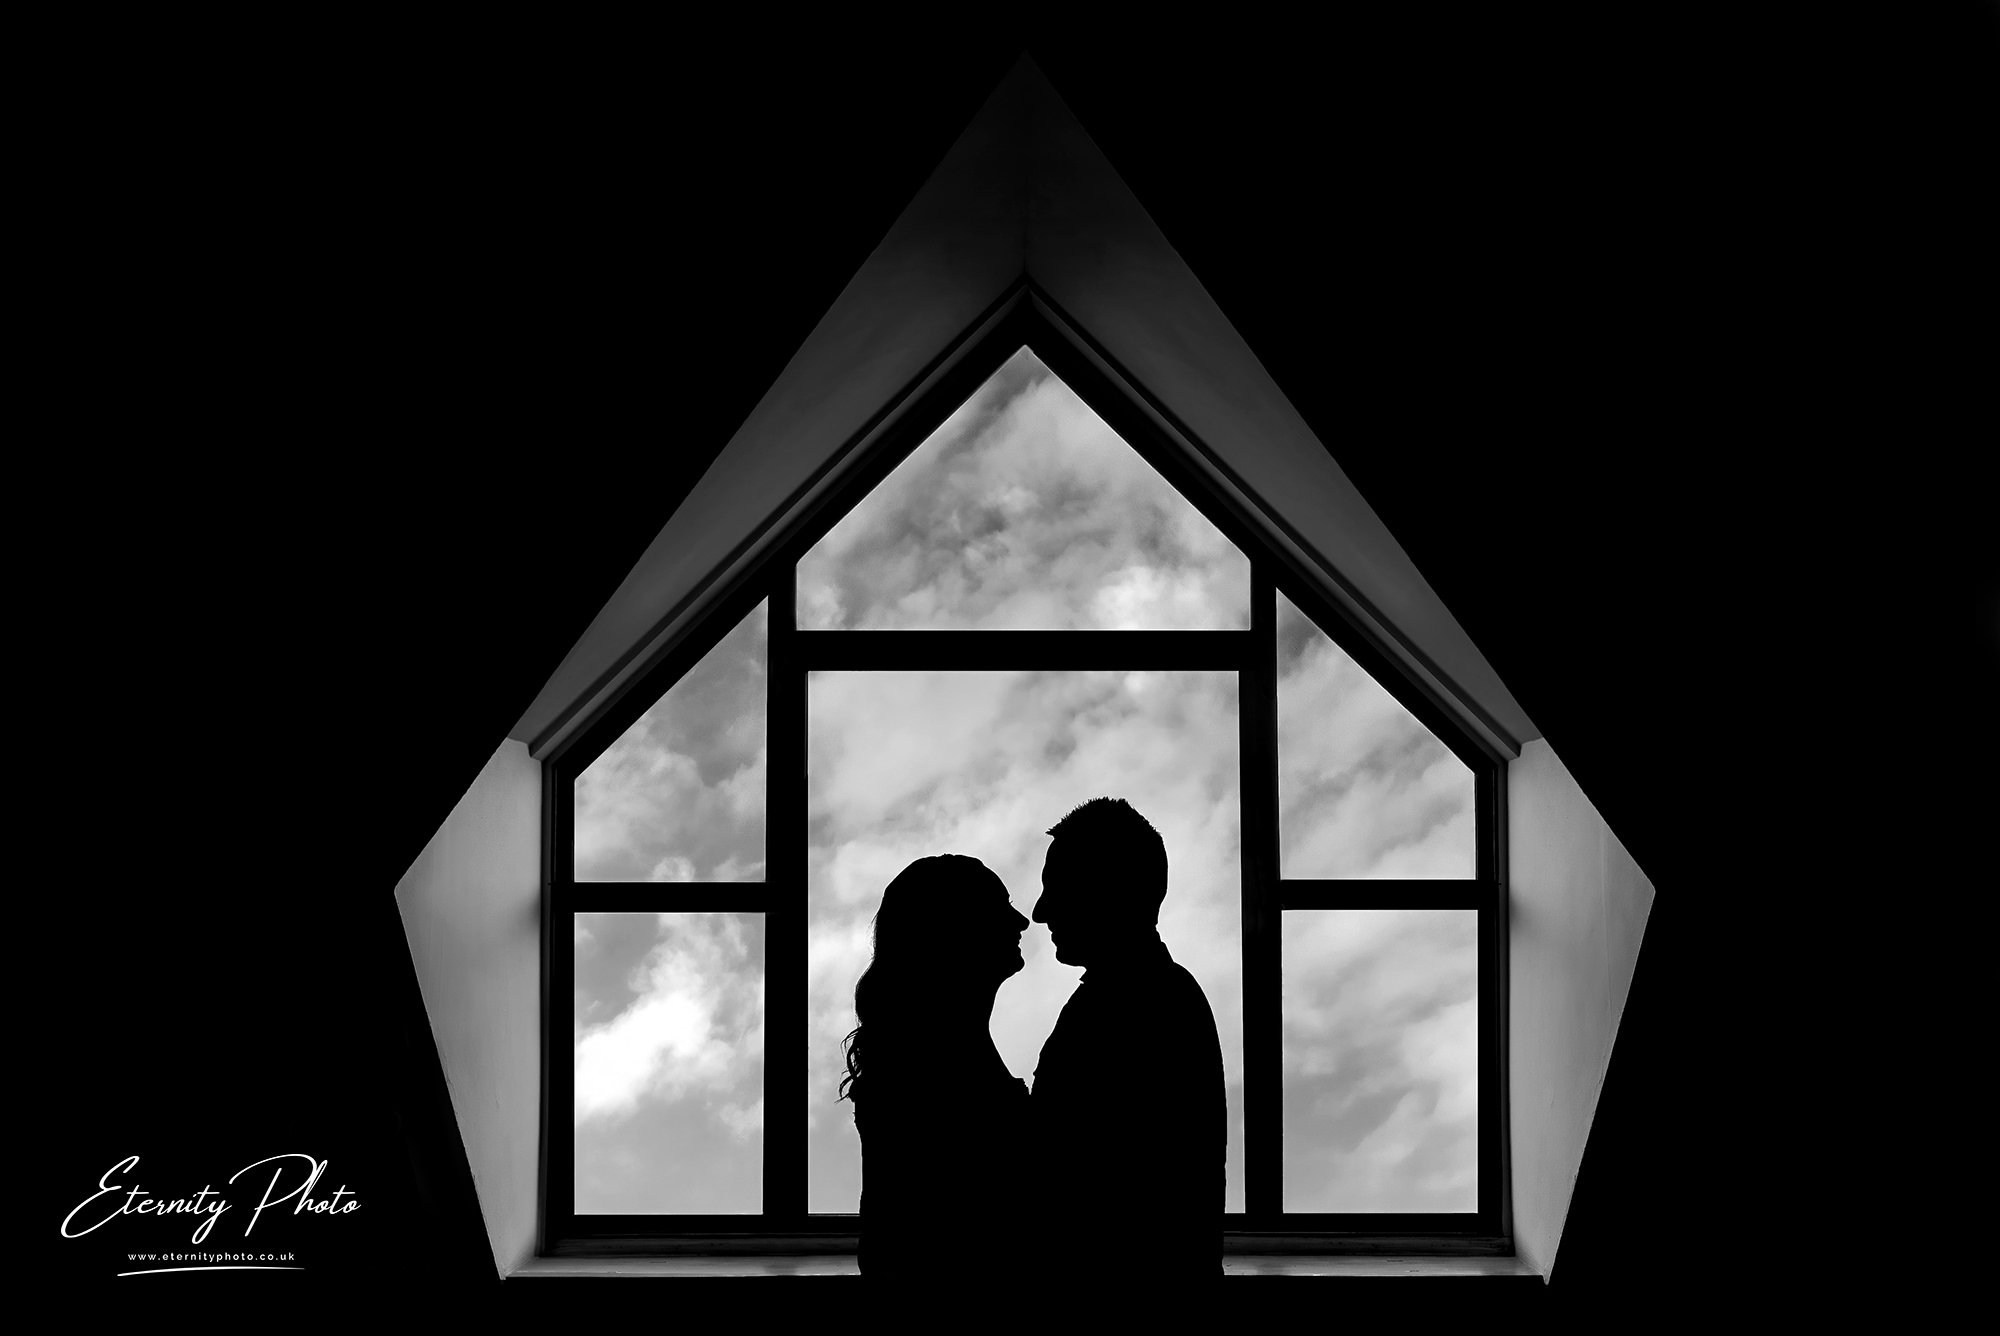 Couple silhouette in window, dramatic sky background.